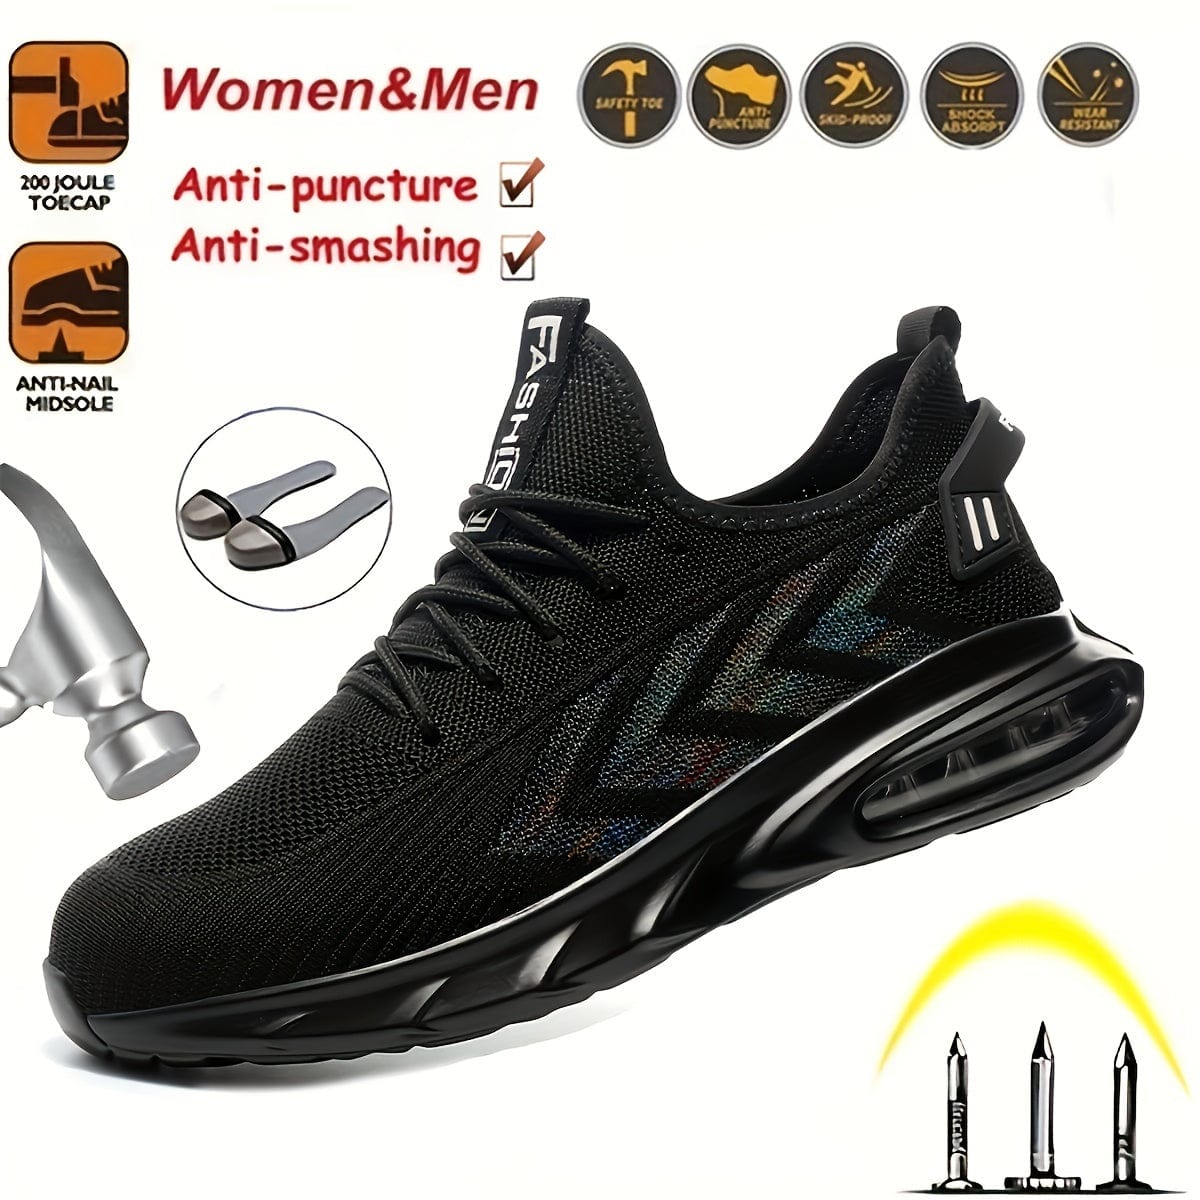 Plus Size Men's Solid Protective Steel Toe Shoes With Air Cushion, Lace Up Comfy Sneakers, Perfect For Constructional Safety Workout Activities